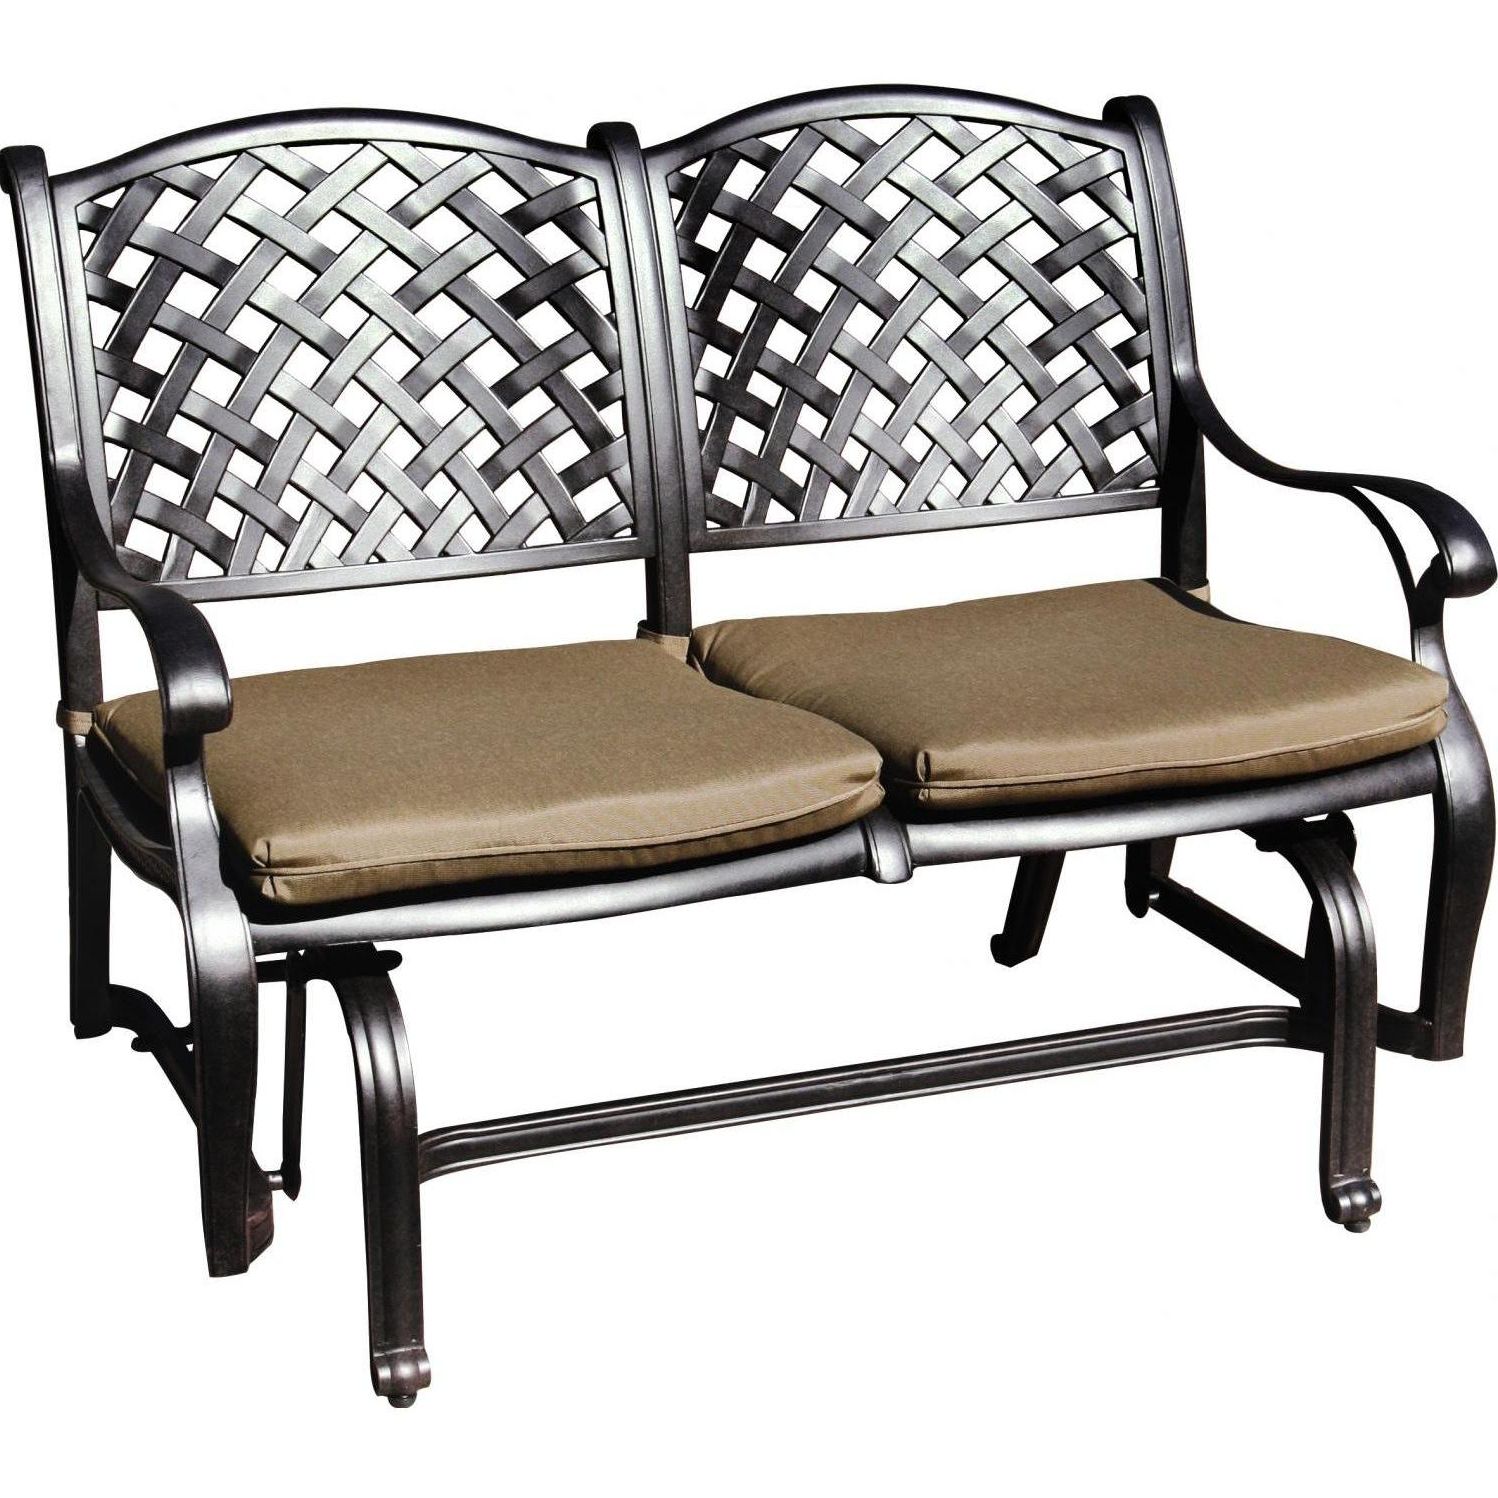 Darlee With Regard To Aluminum Outdoor Double Glider Benches (View 2 of 30)